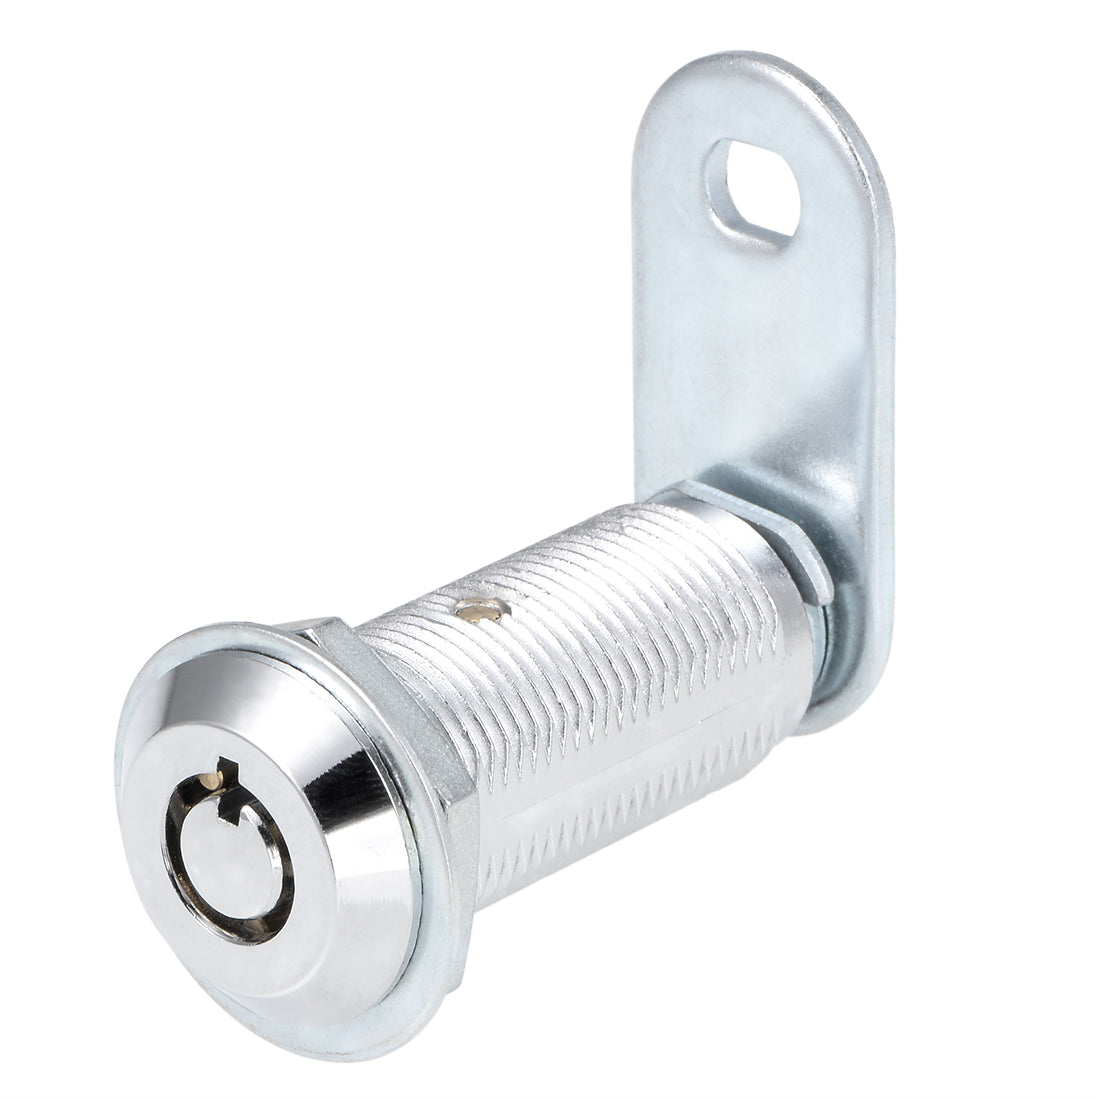 uxcell Uxcell Tubular Cam Lock 40mm Cylinder Length Chrome Finish Keyed Different 2Pcs